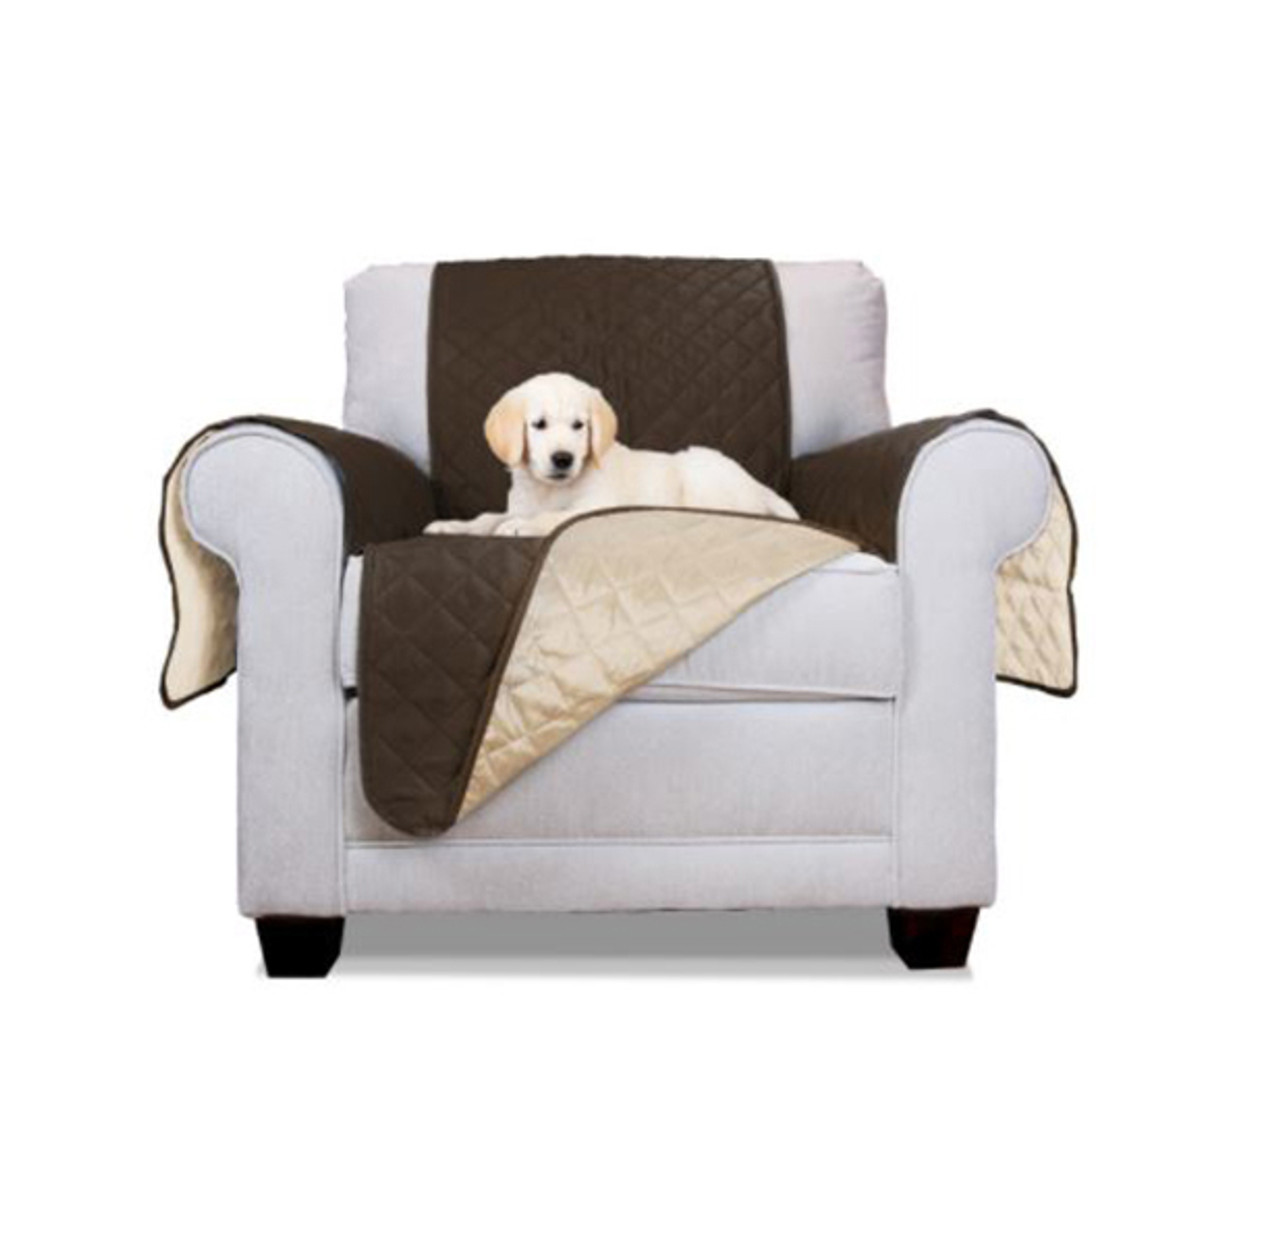 FurHaven™ Reversible Furniture Protector product image